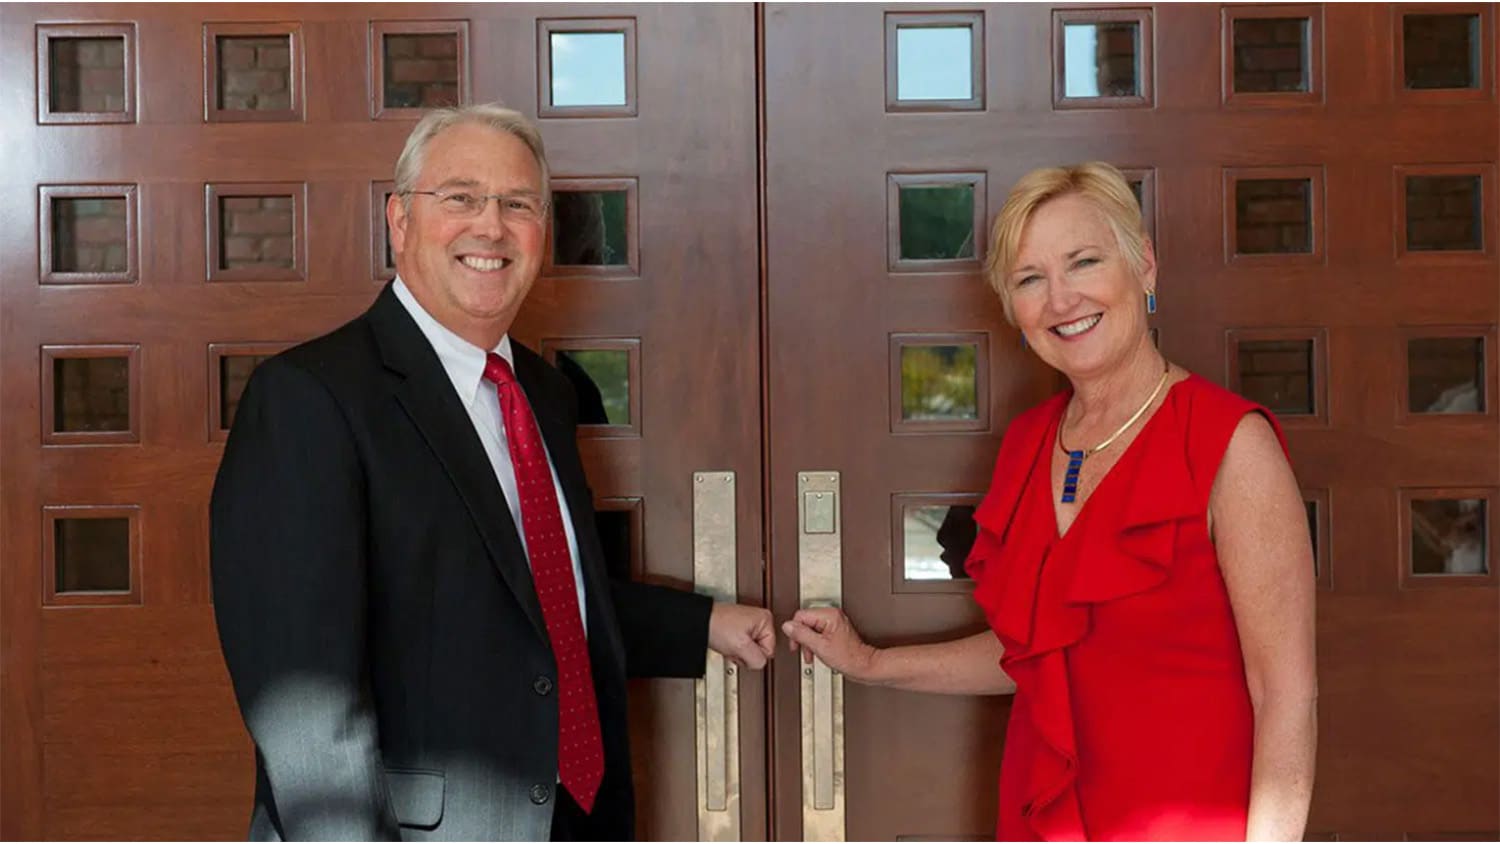 Chancellor Randy Woodson and his wife, Susan, holding the handles to the front door of their house